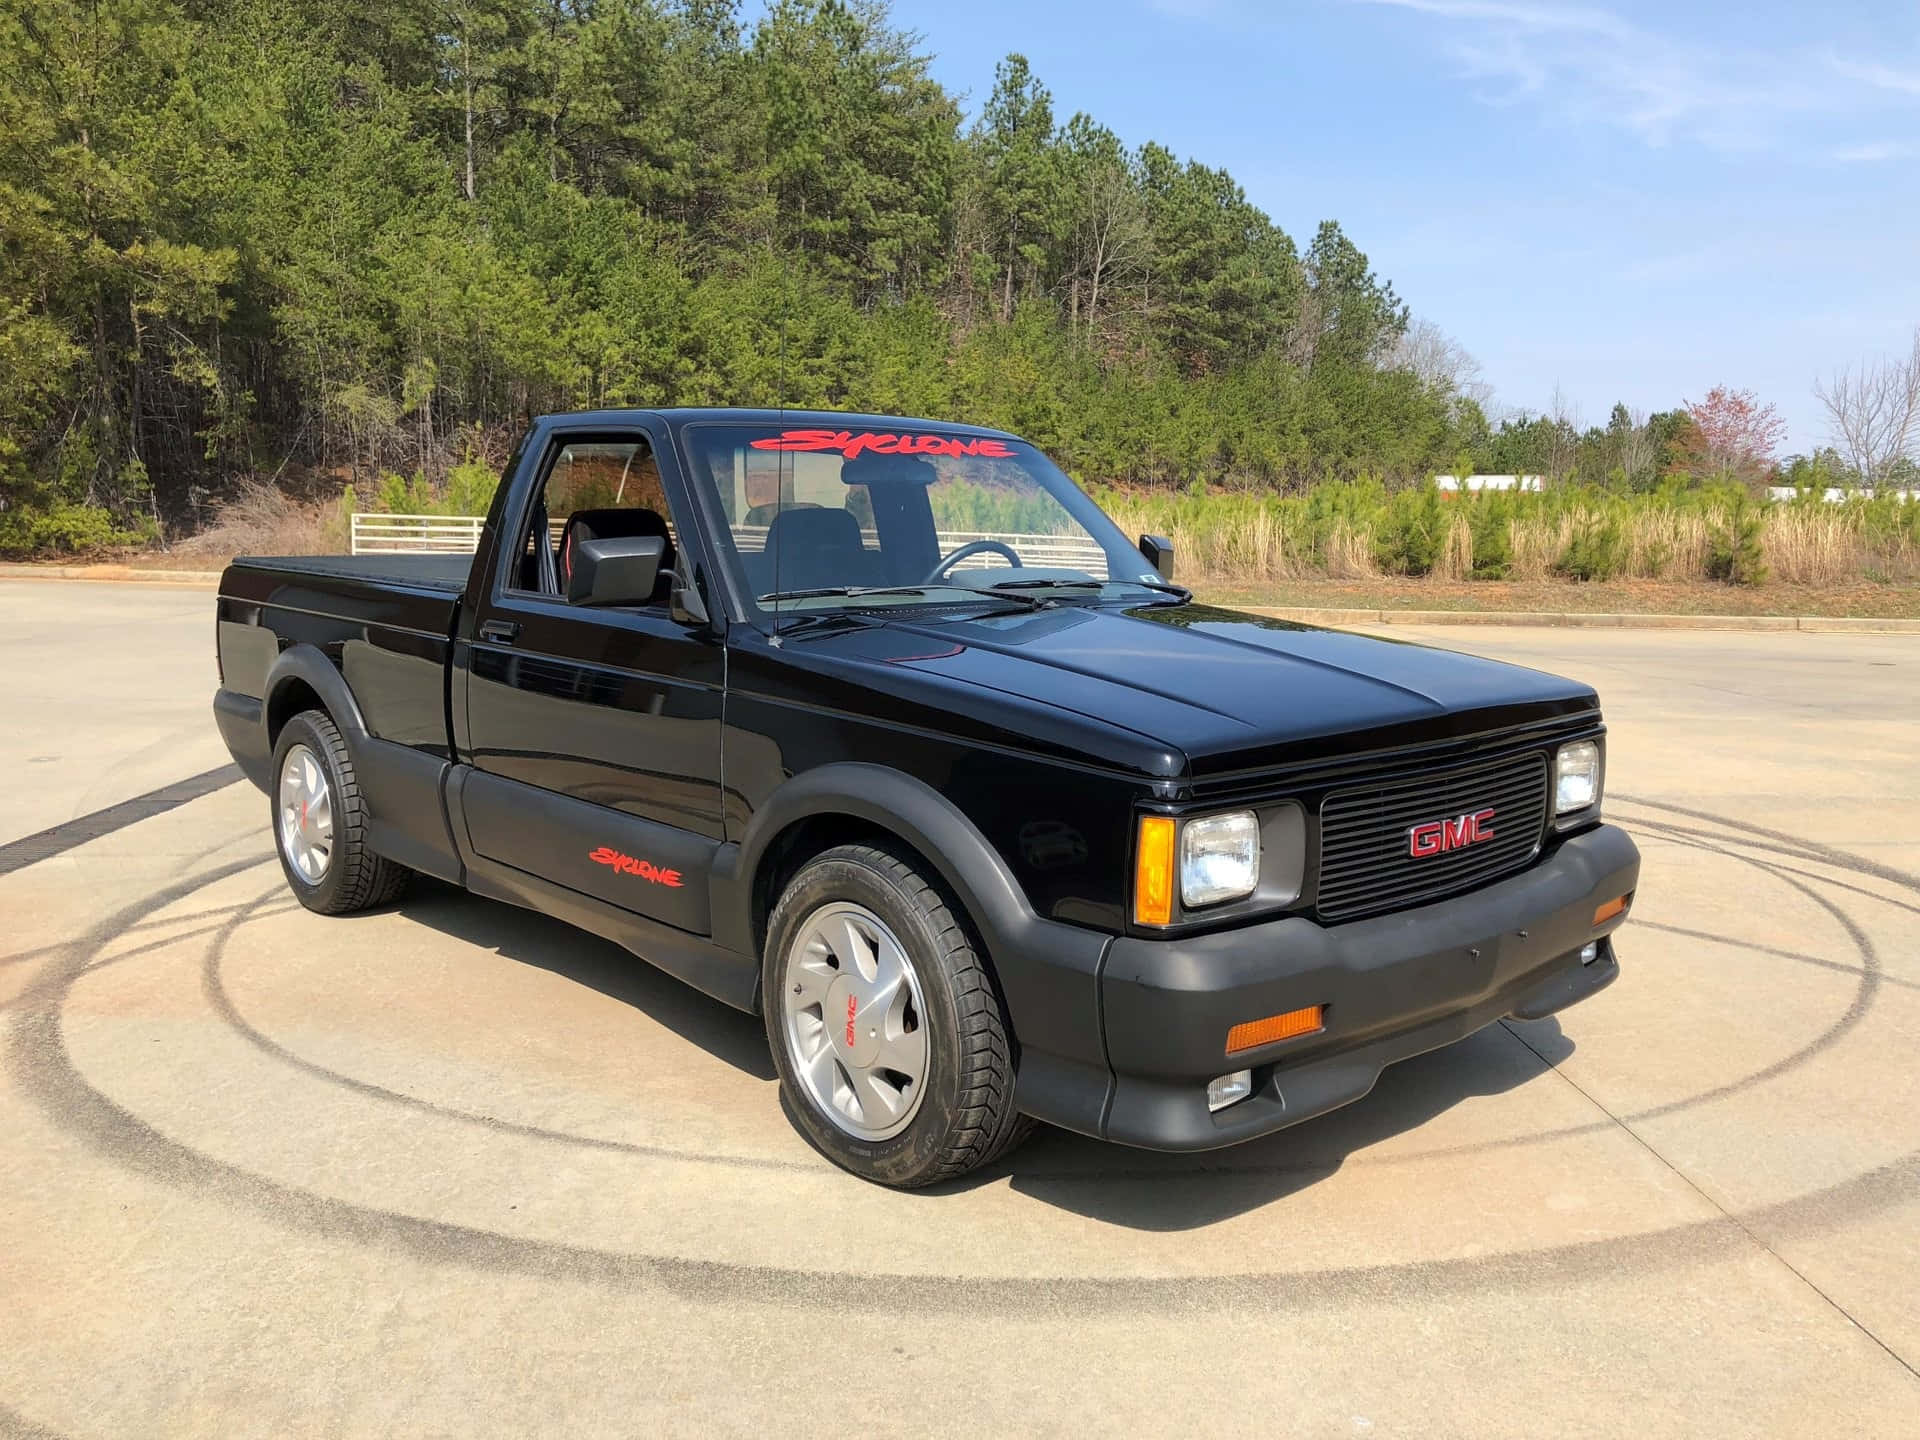 GMC Syclone Exhibiting its Classic Style and Power Wallpaper